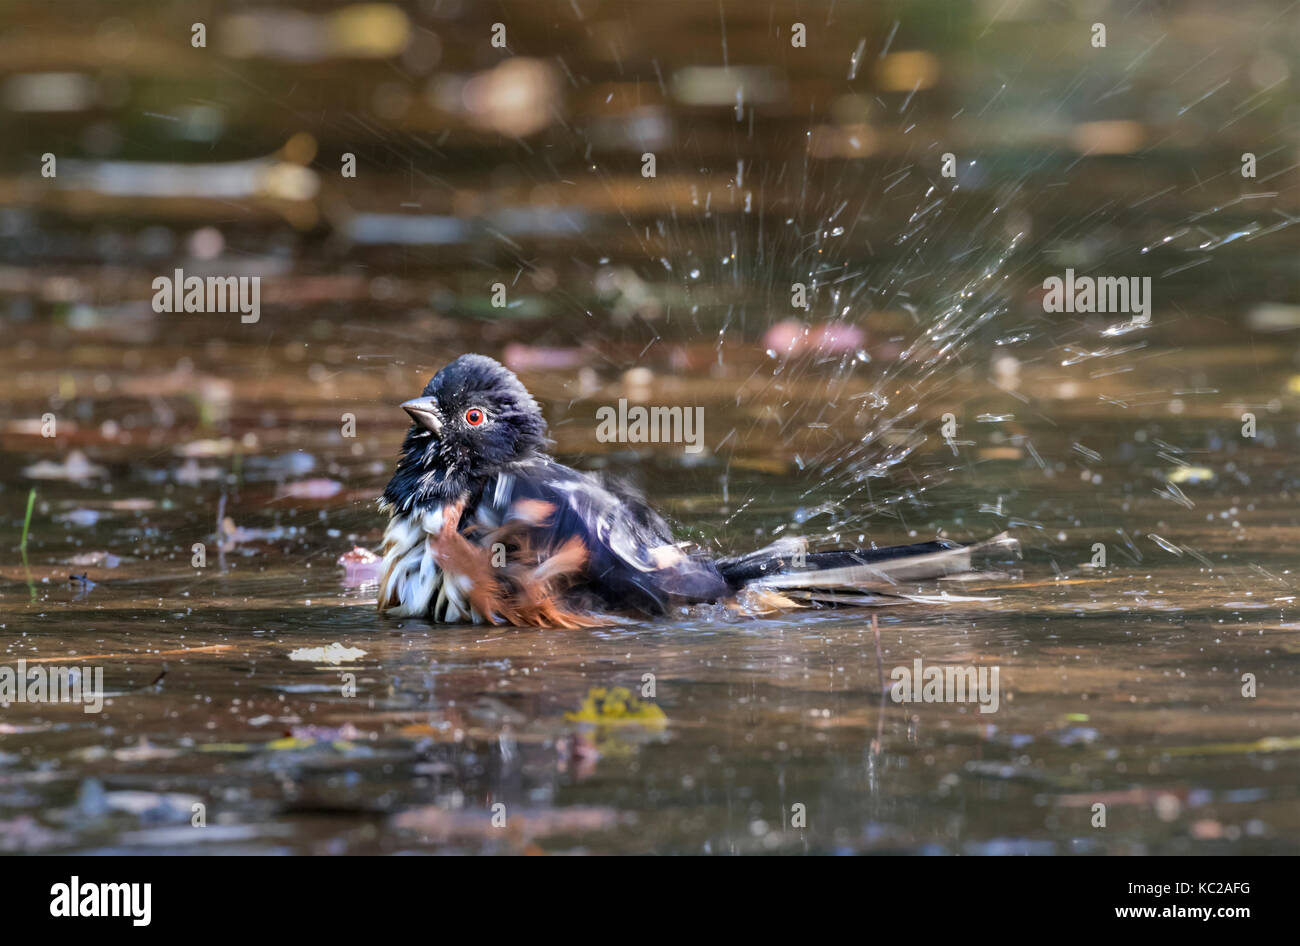 Eastern Towhee (Pipilo erythrophthalmus) bathing in a forest creek among fallen autumn leaves, Ames, Iowa, USA. Stock Photo